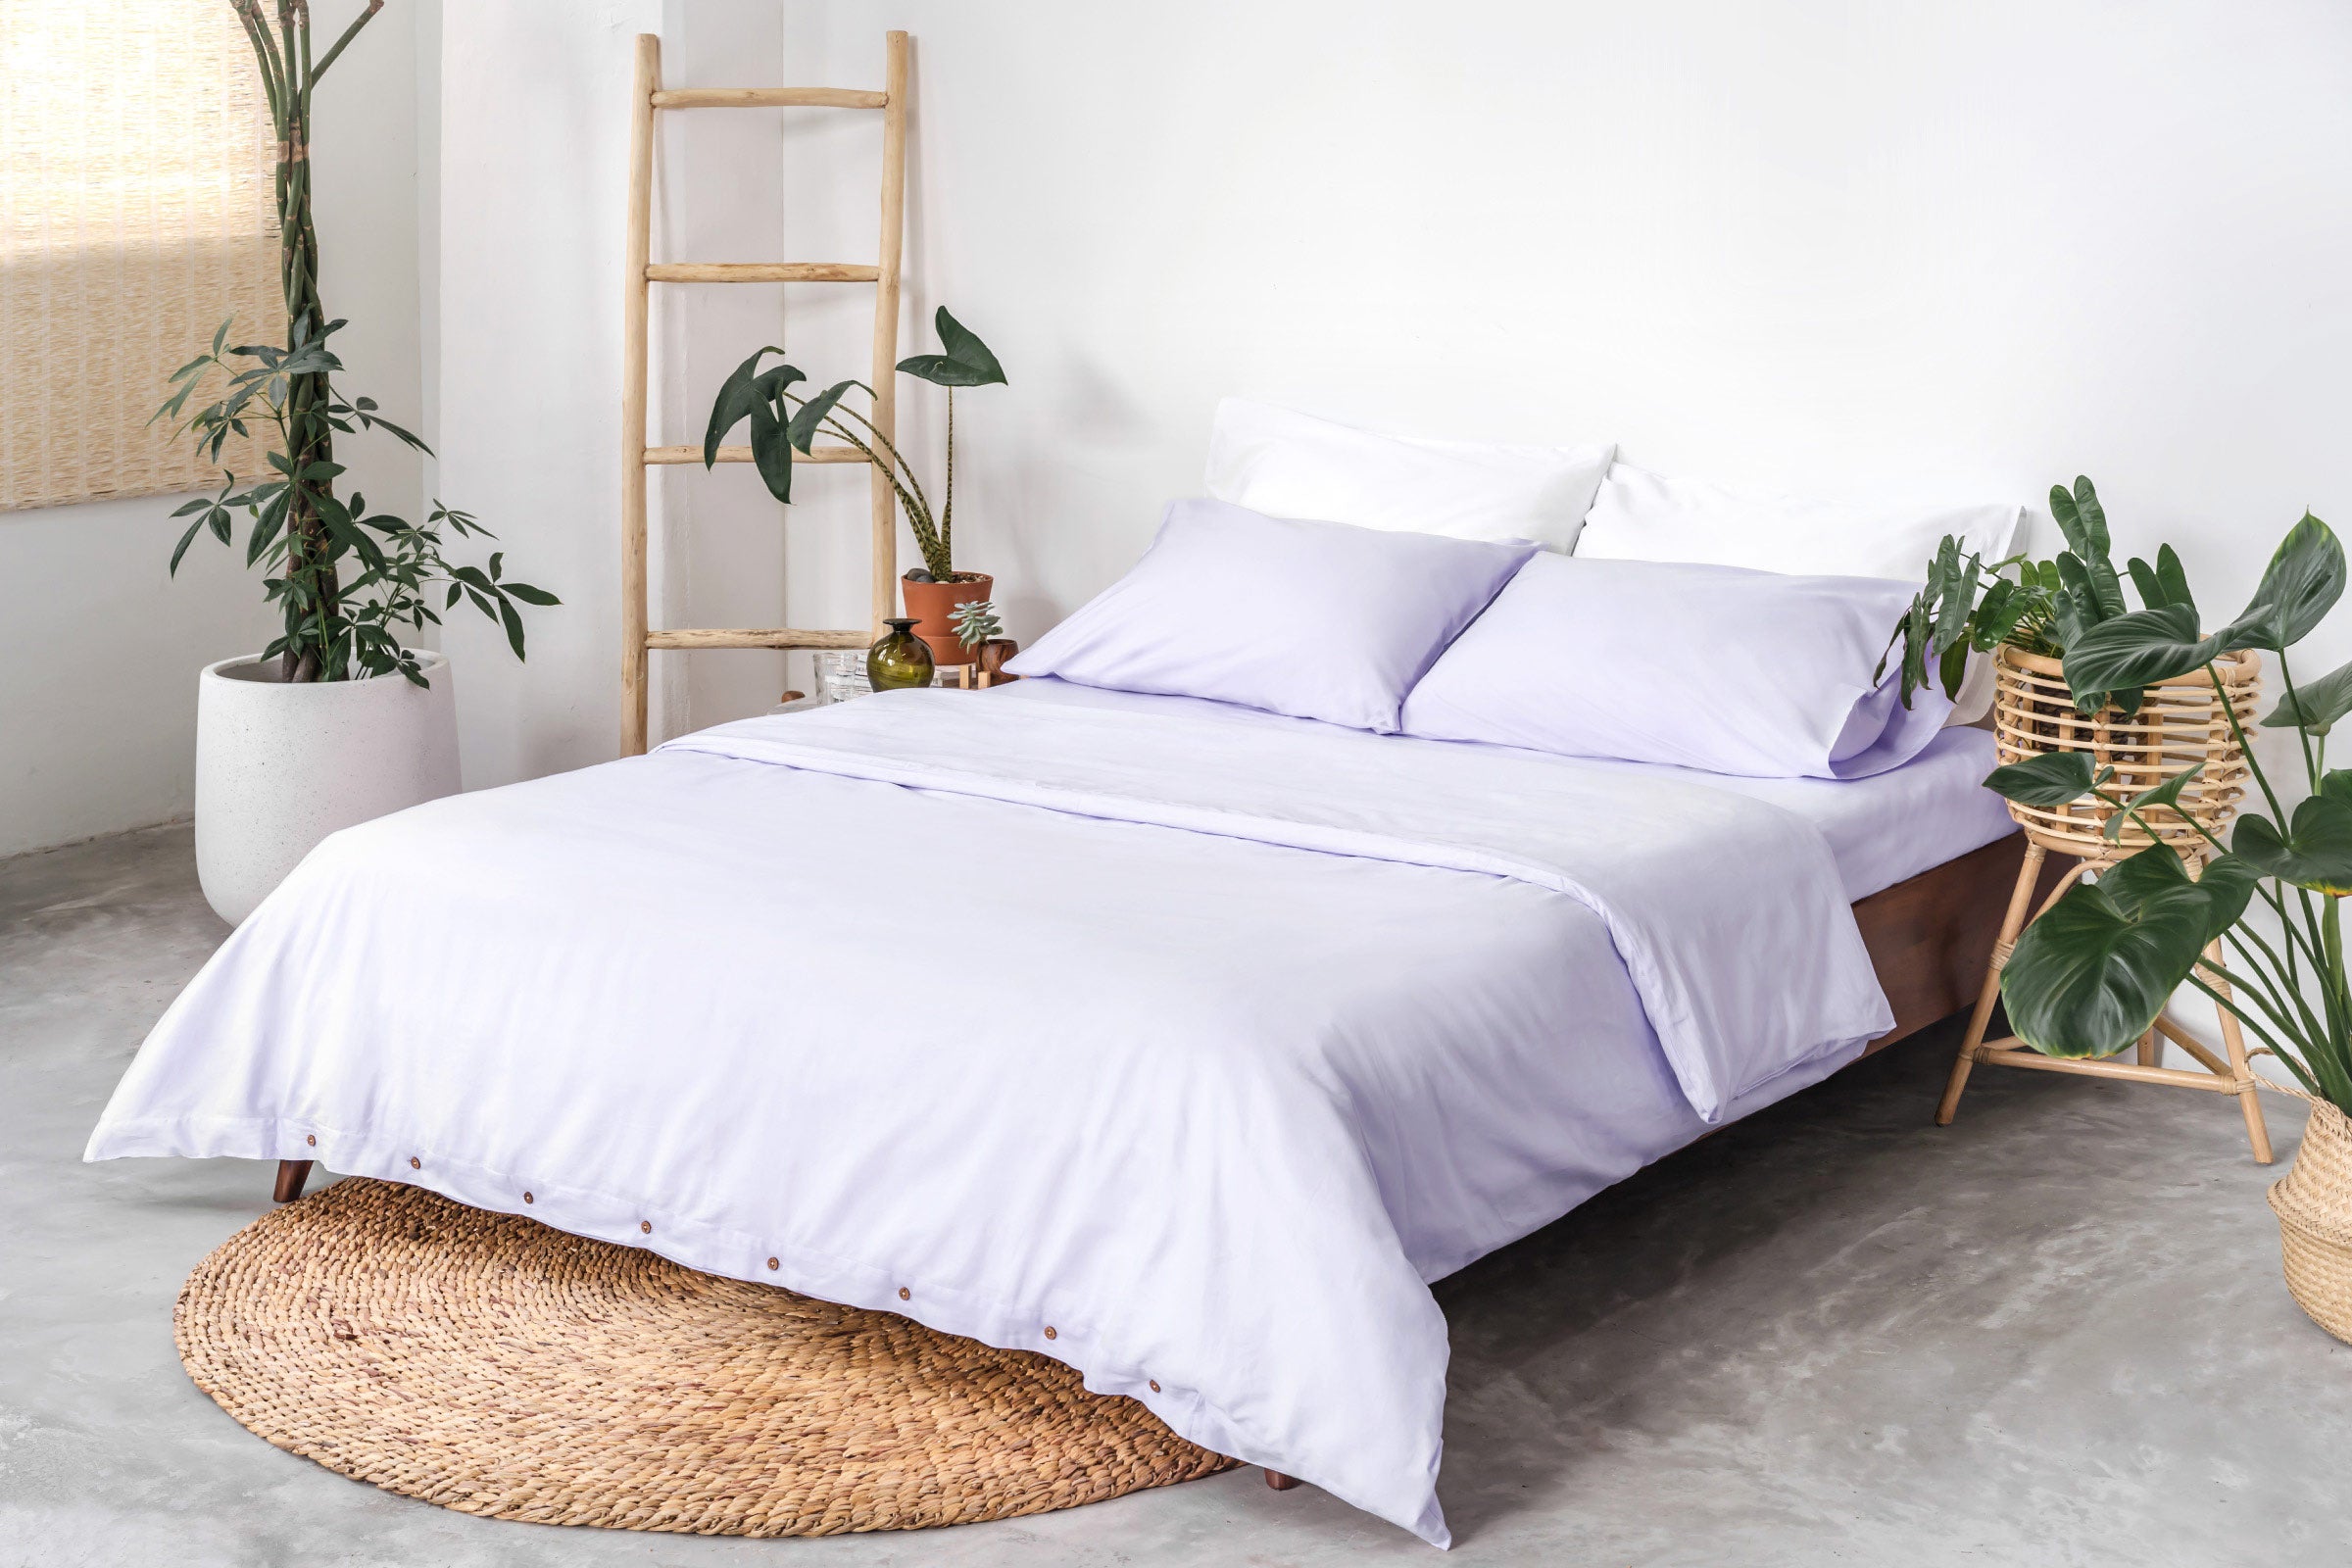 classic-lilac-duvet-cover-fitted-sheet-pillowcase-pair-white-pillowcase-pair-side-view-by-sojao.jpg